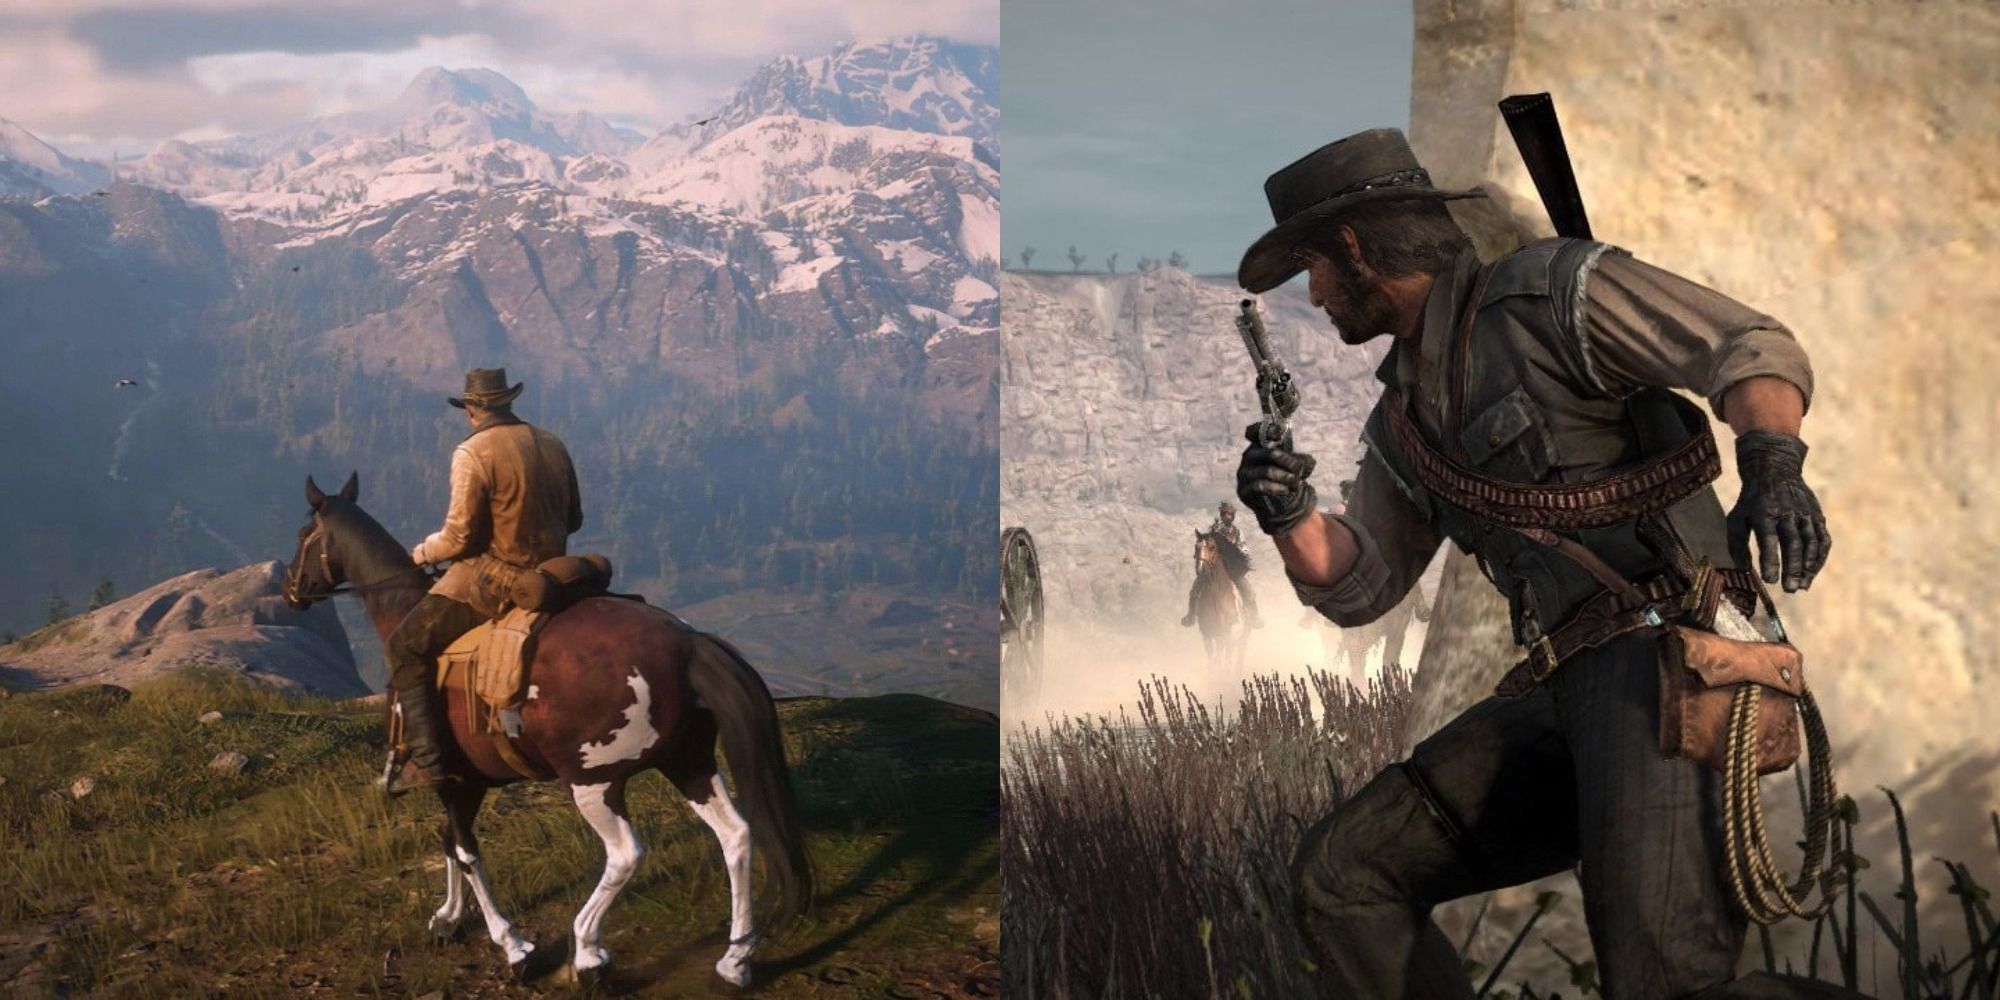 5 Things Red Dead Redemption 2 Does Better Than The First Game (& 5 Ways Original Is Superior)